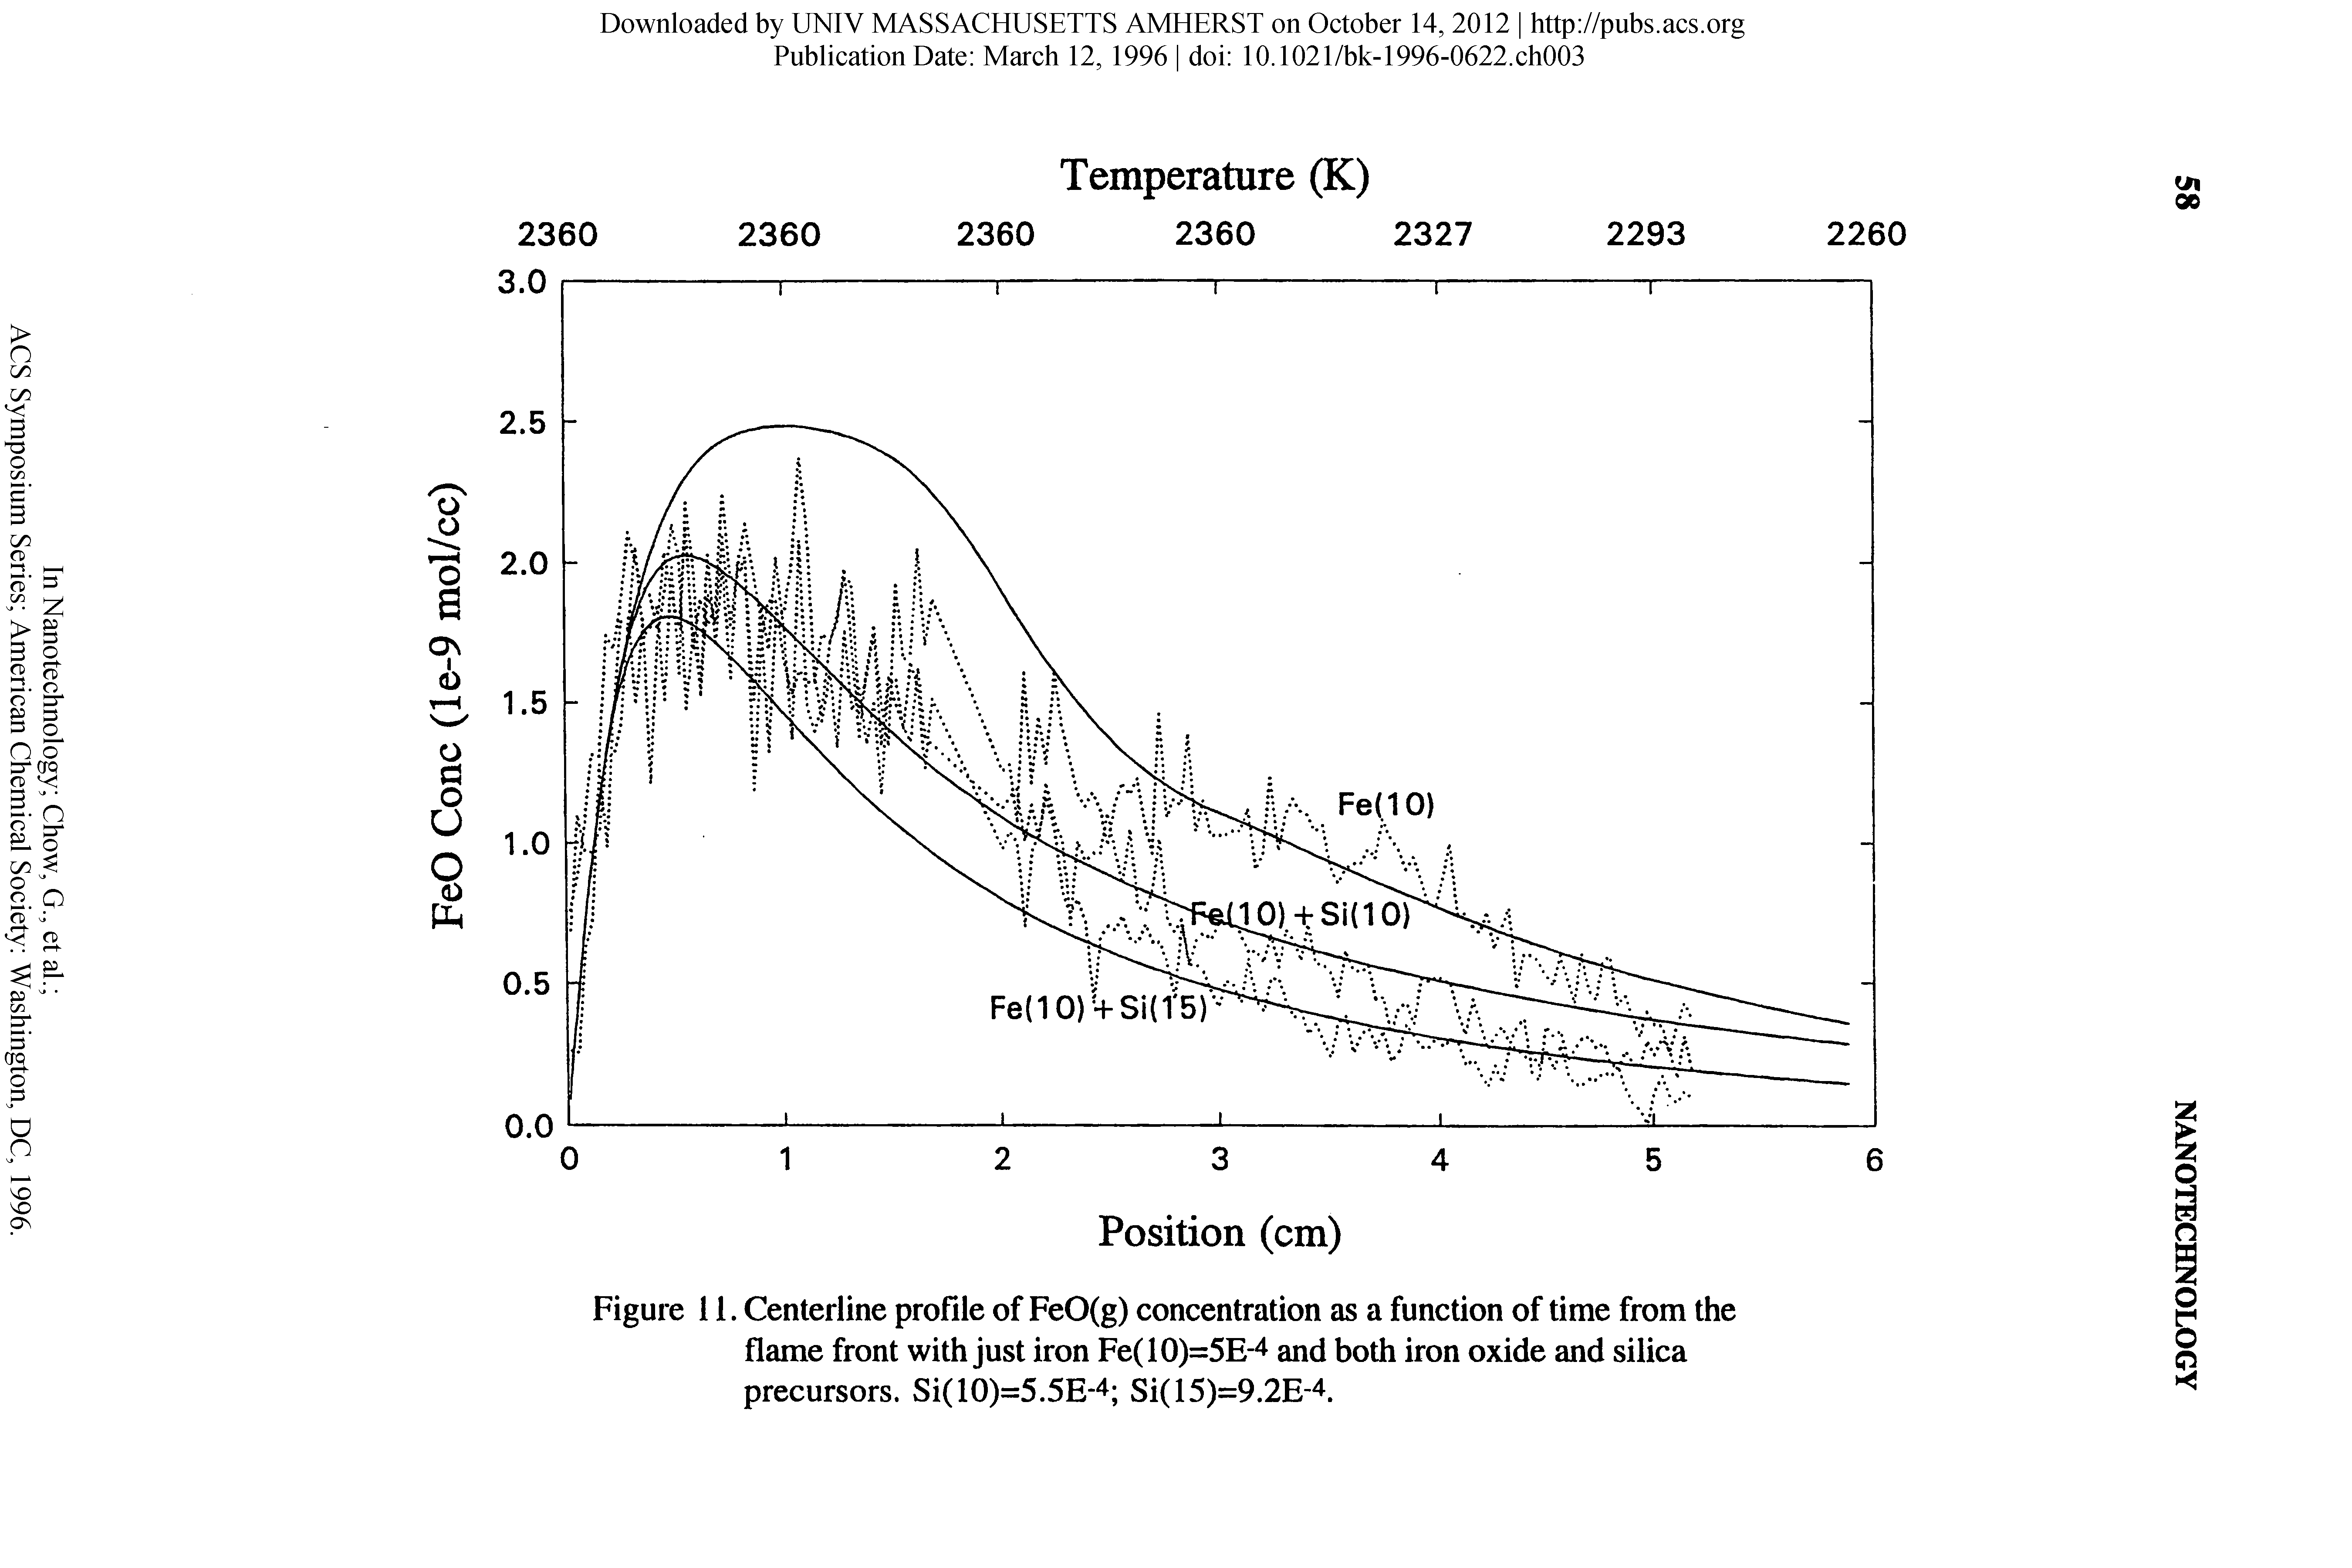 Figure 11. Centerline profile of FeO(g) concentration as a function of time from the flame front with just iron Fe(10)=5E-4 and both iron oxide and silica precursors. Si(10)=5.5E-4 Si(15)=9.2E-4.